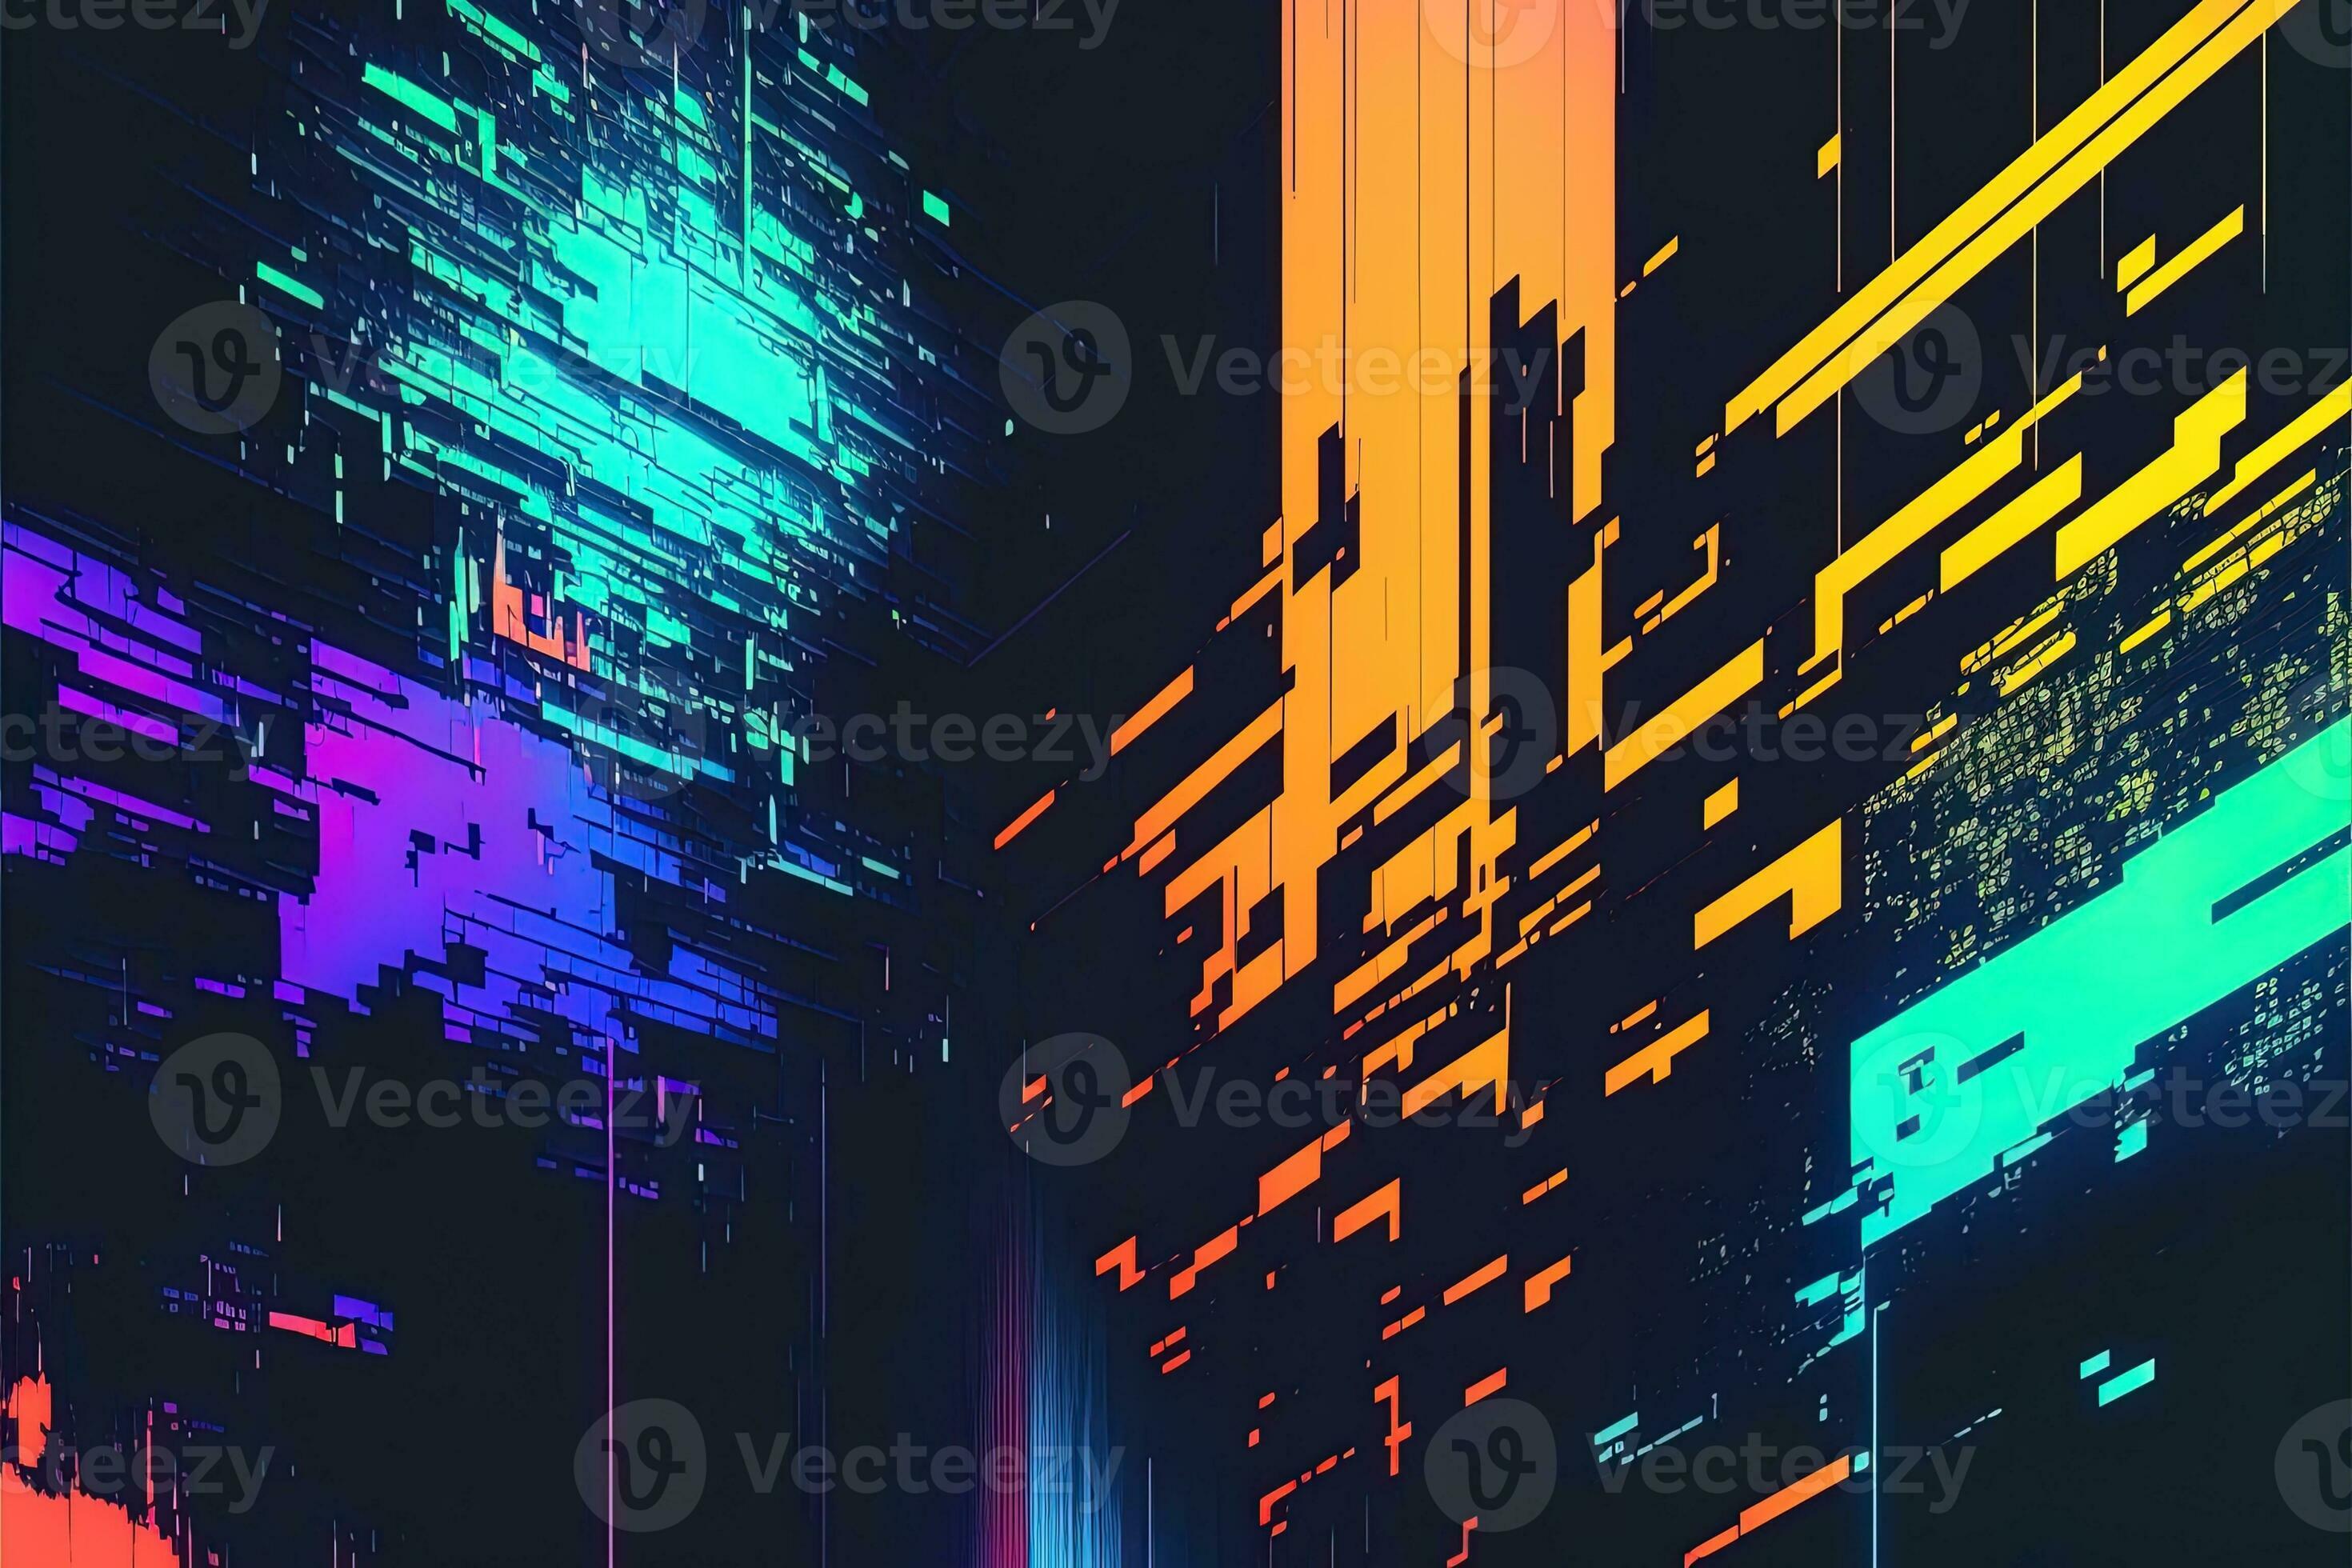 A colorful abstract background with glitch effects - Cyberpunk